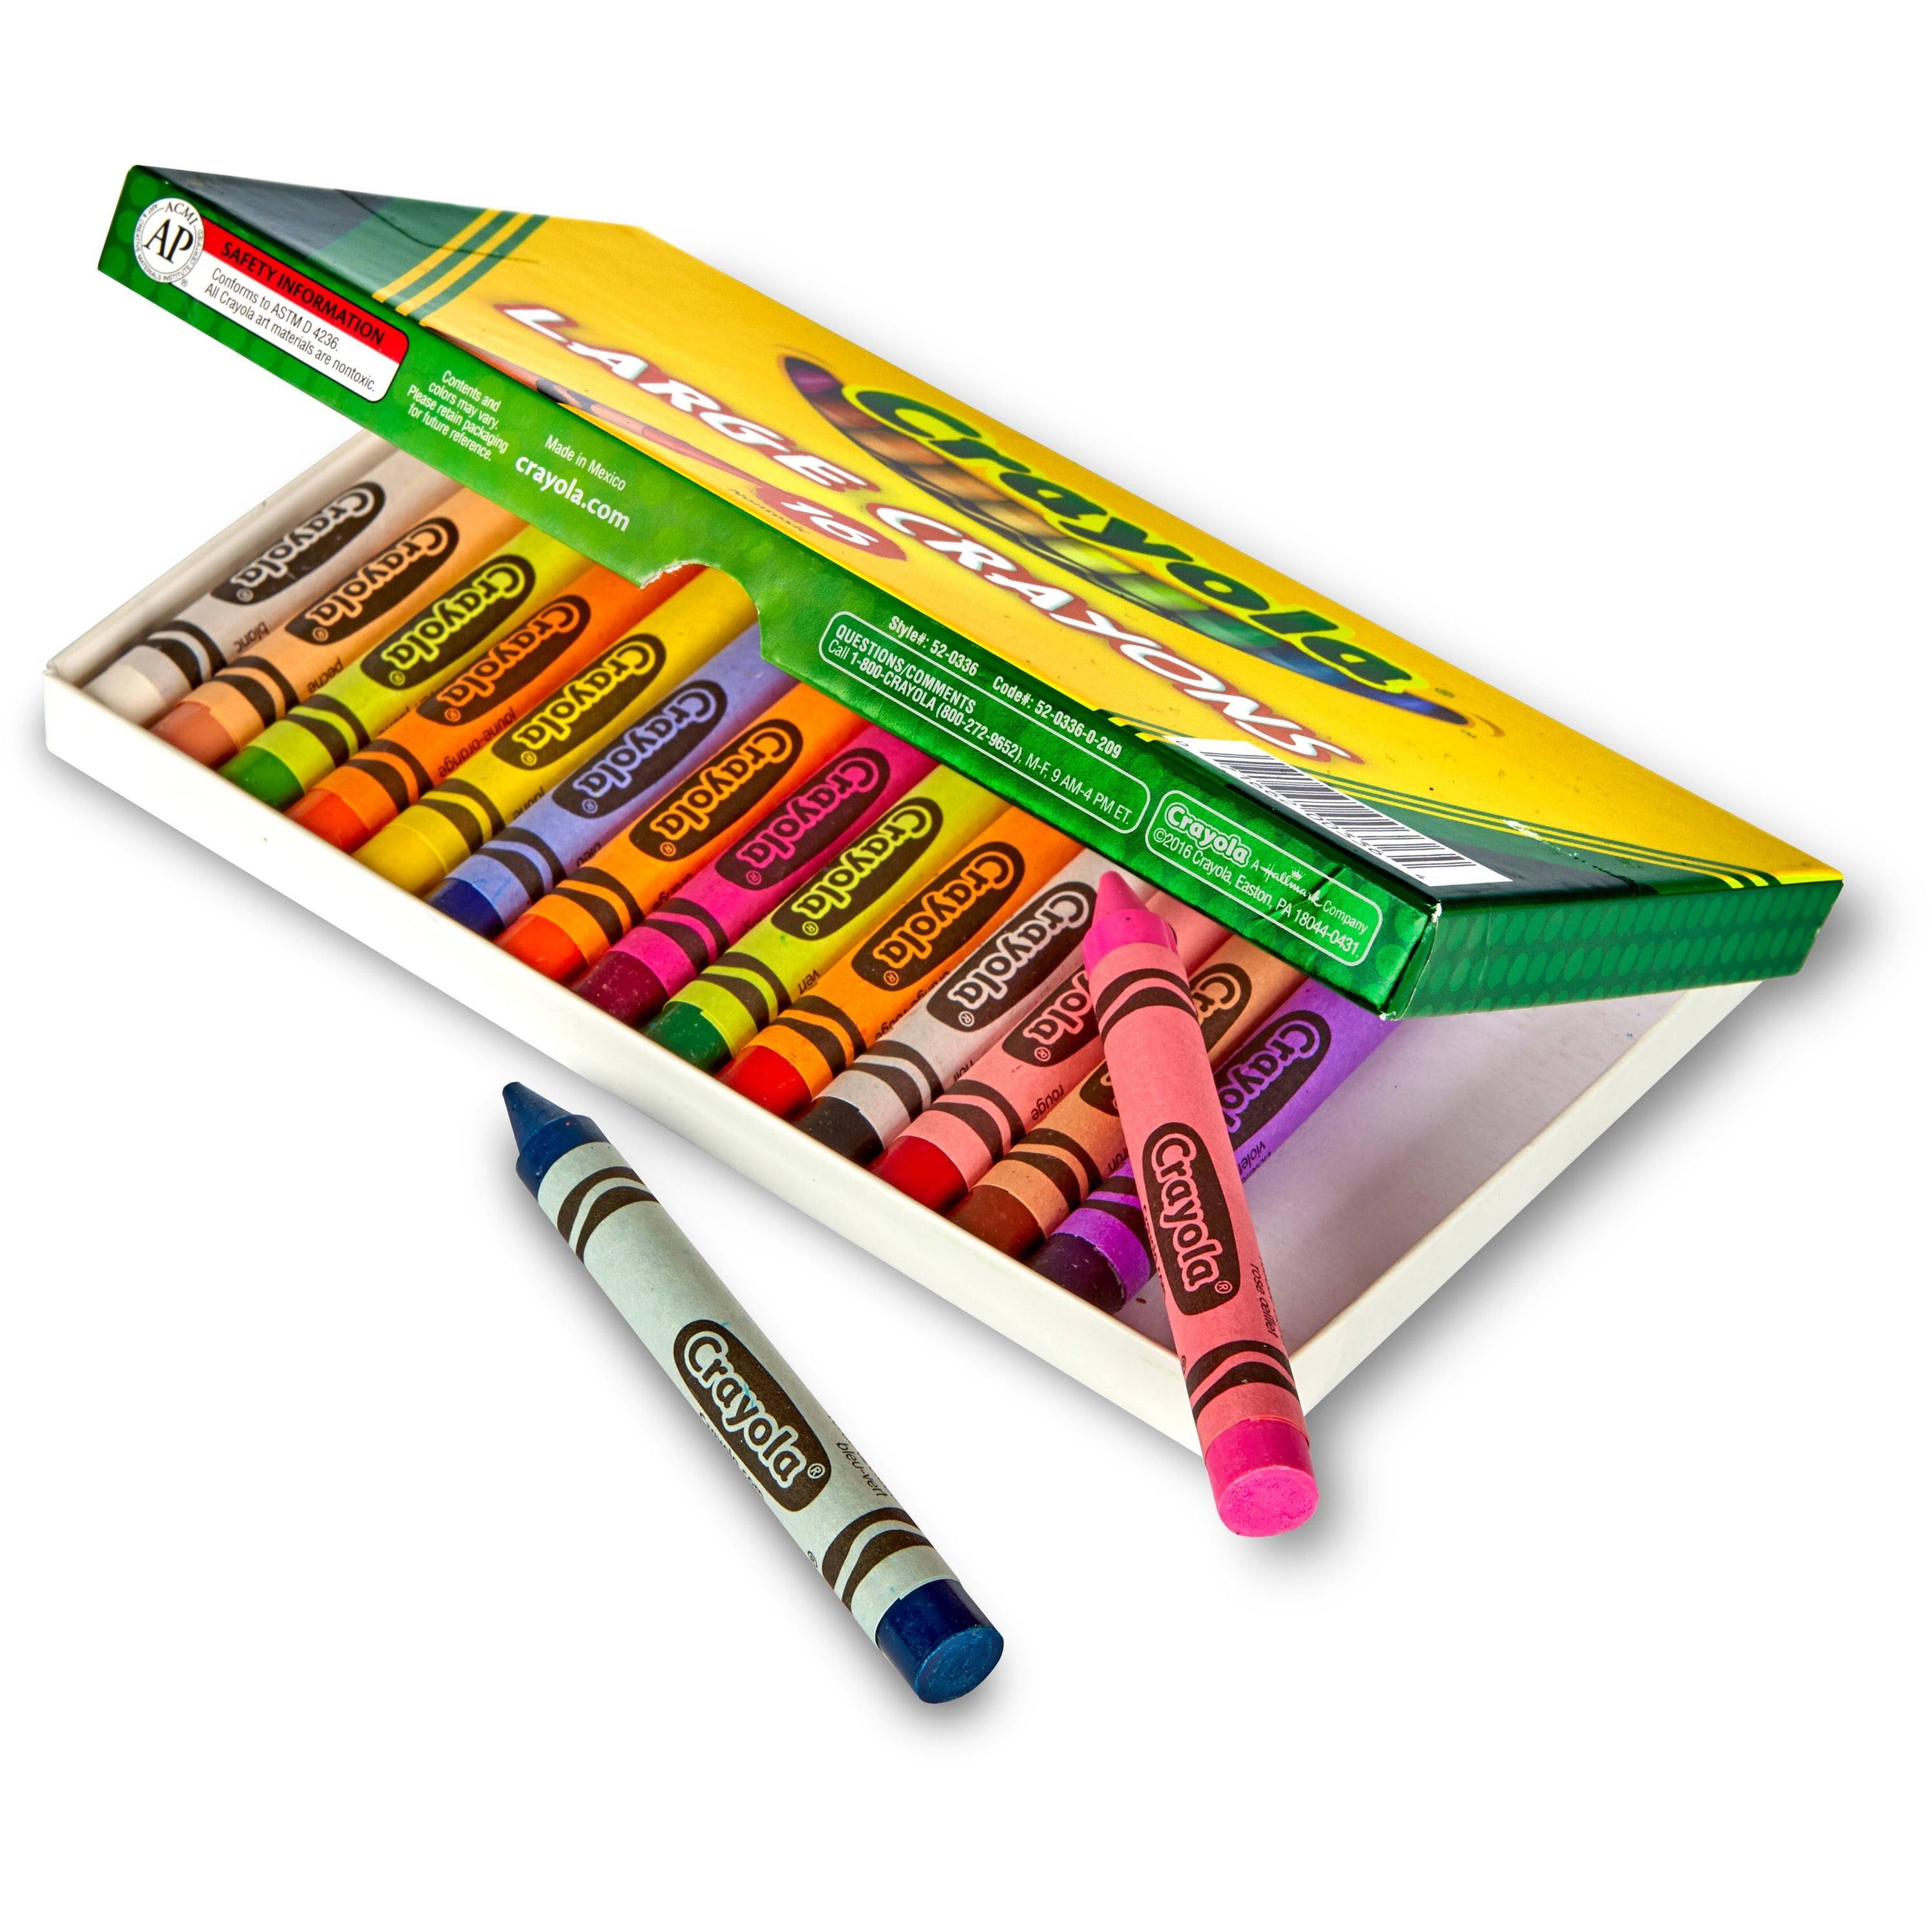 Crayola Large Size Classic Crayons 8 Count, Great For Small Hands 